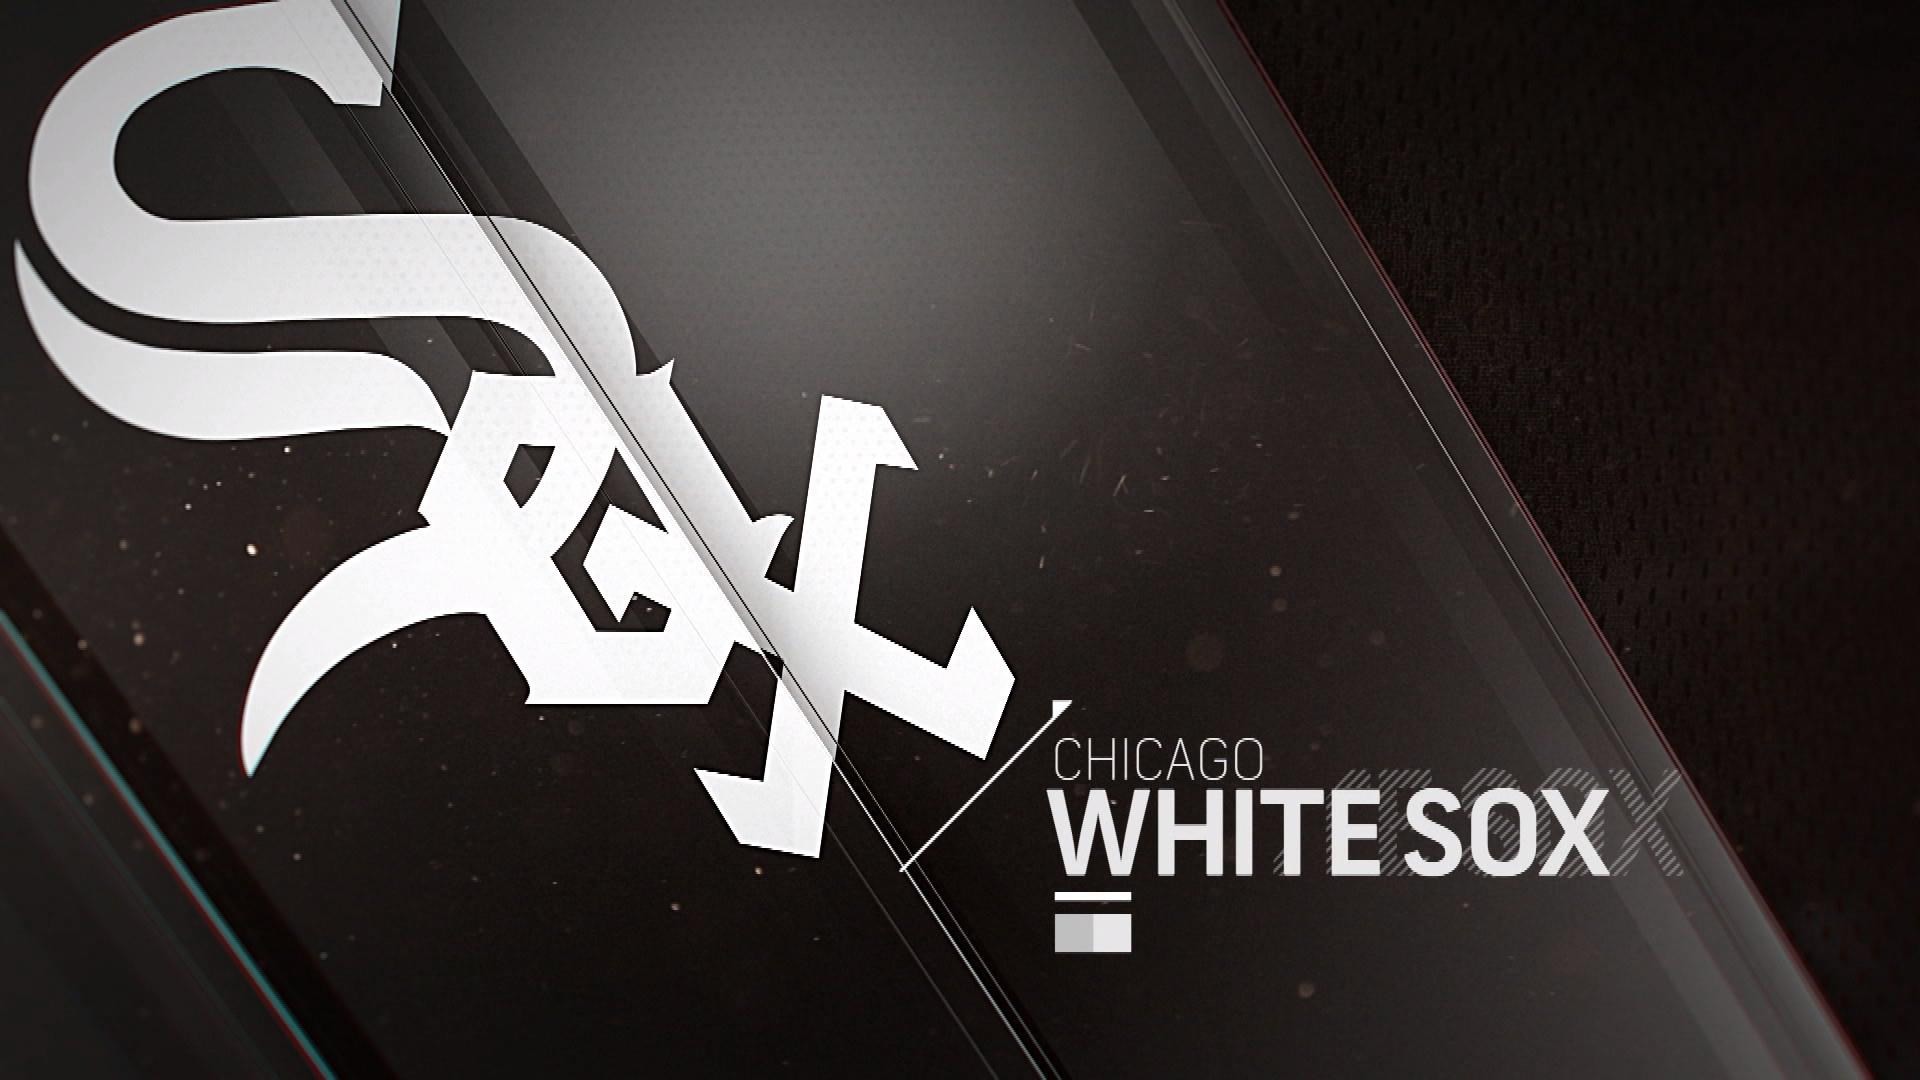 1920x1080 px white sox background wallpaper free by Page Leapman